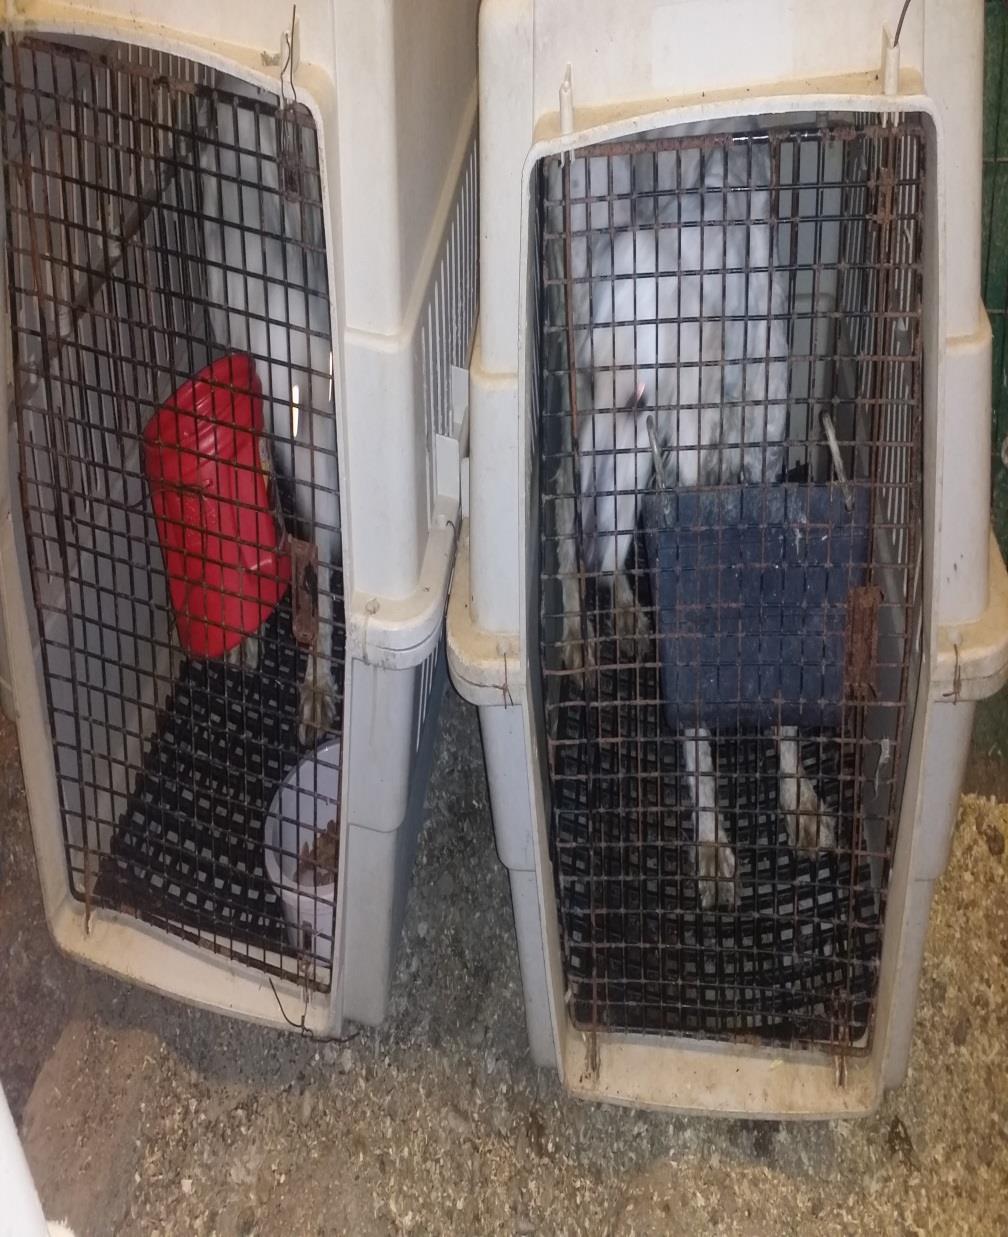 Multiple dogs were housed in airline crates. These crates are meant for transport or for temporary housing while the owner is away. Crates are not meant for permanent living conditions.